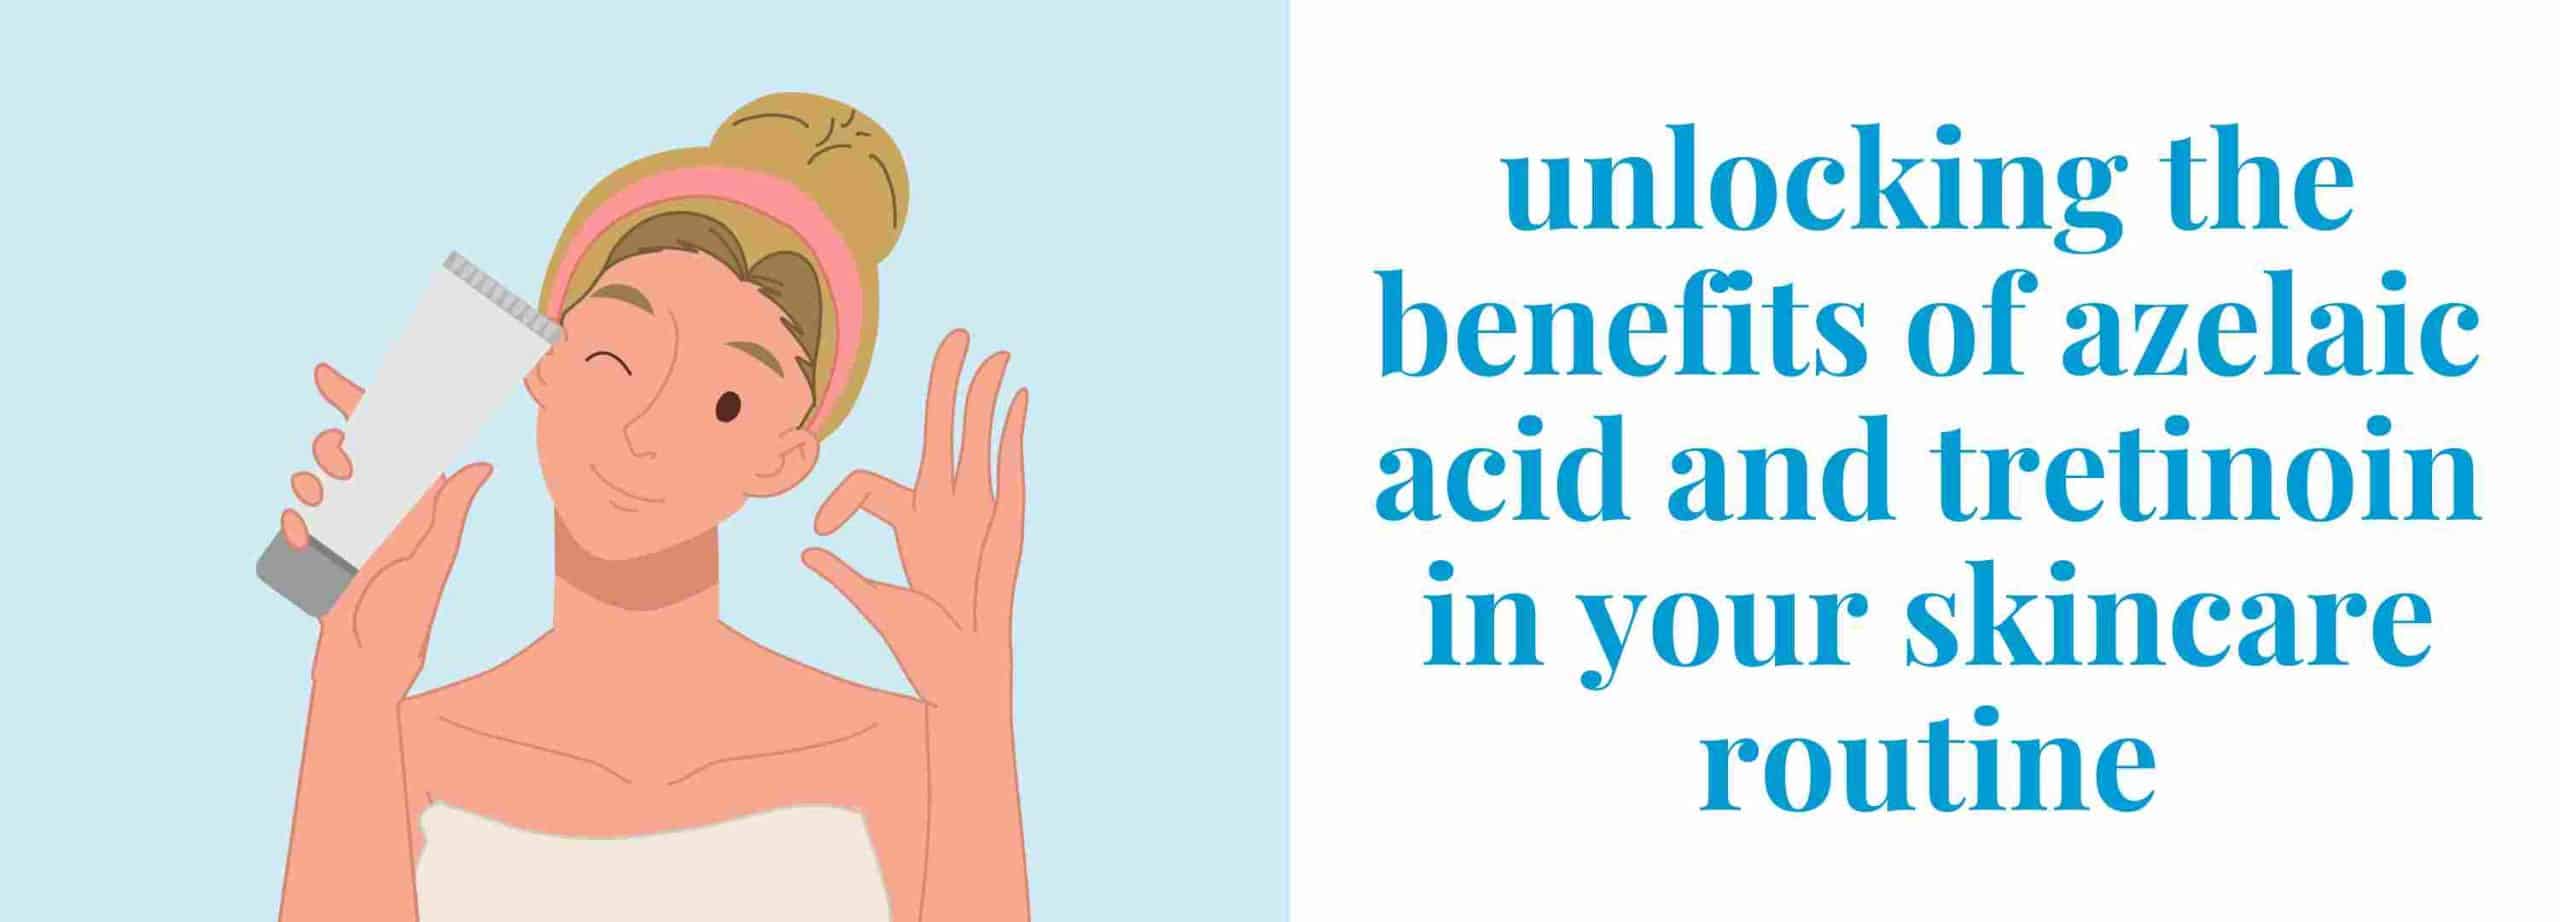 Unlocking the Benefits of Azelaic Acid and Tretinoin in Your Skincare Routine